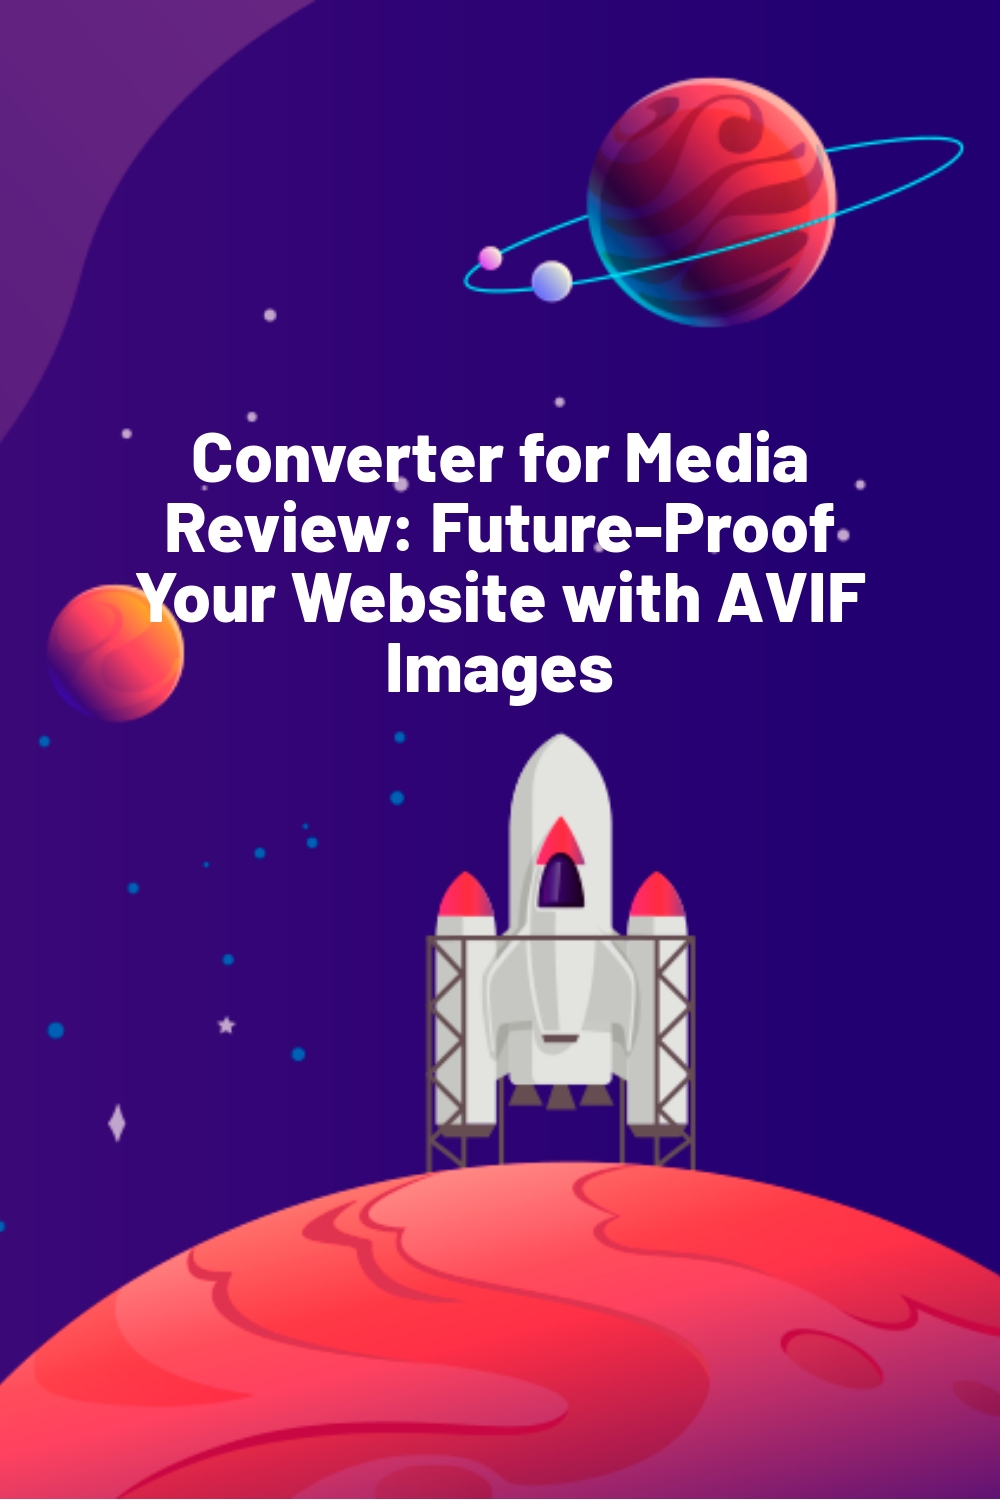 Converter for Media Review: Future-Proof Your Website with AVIF Images